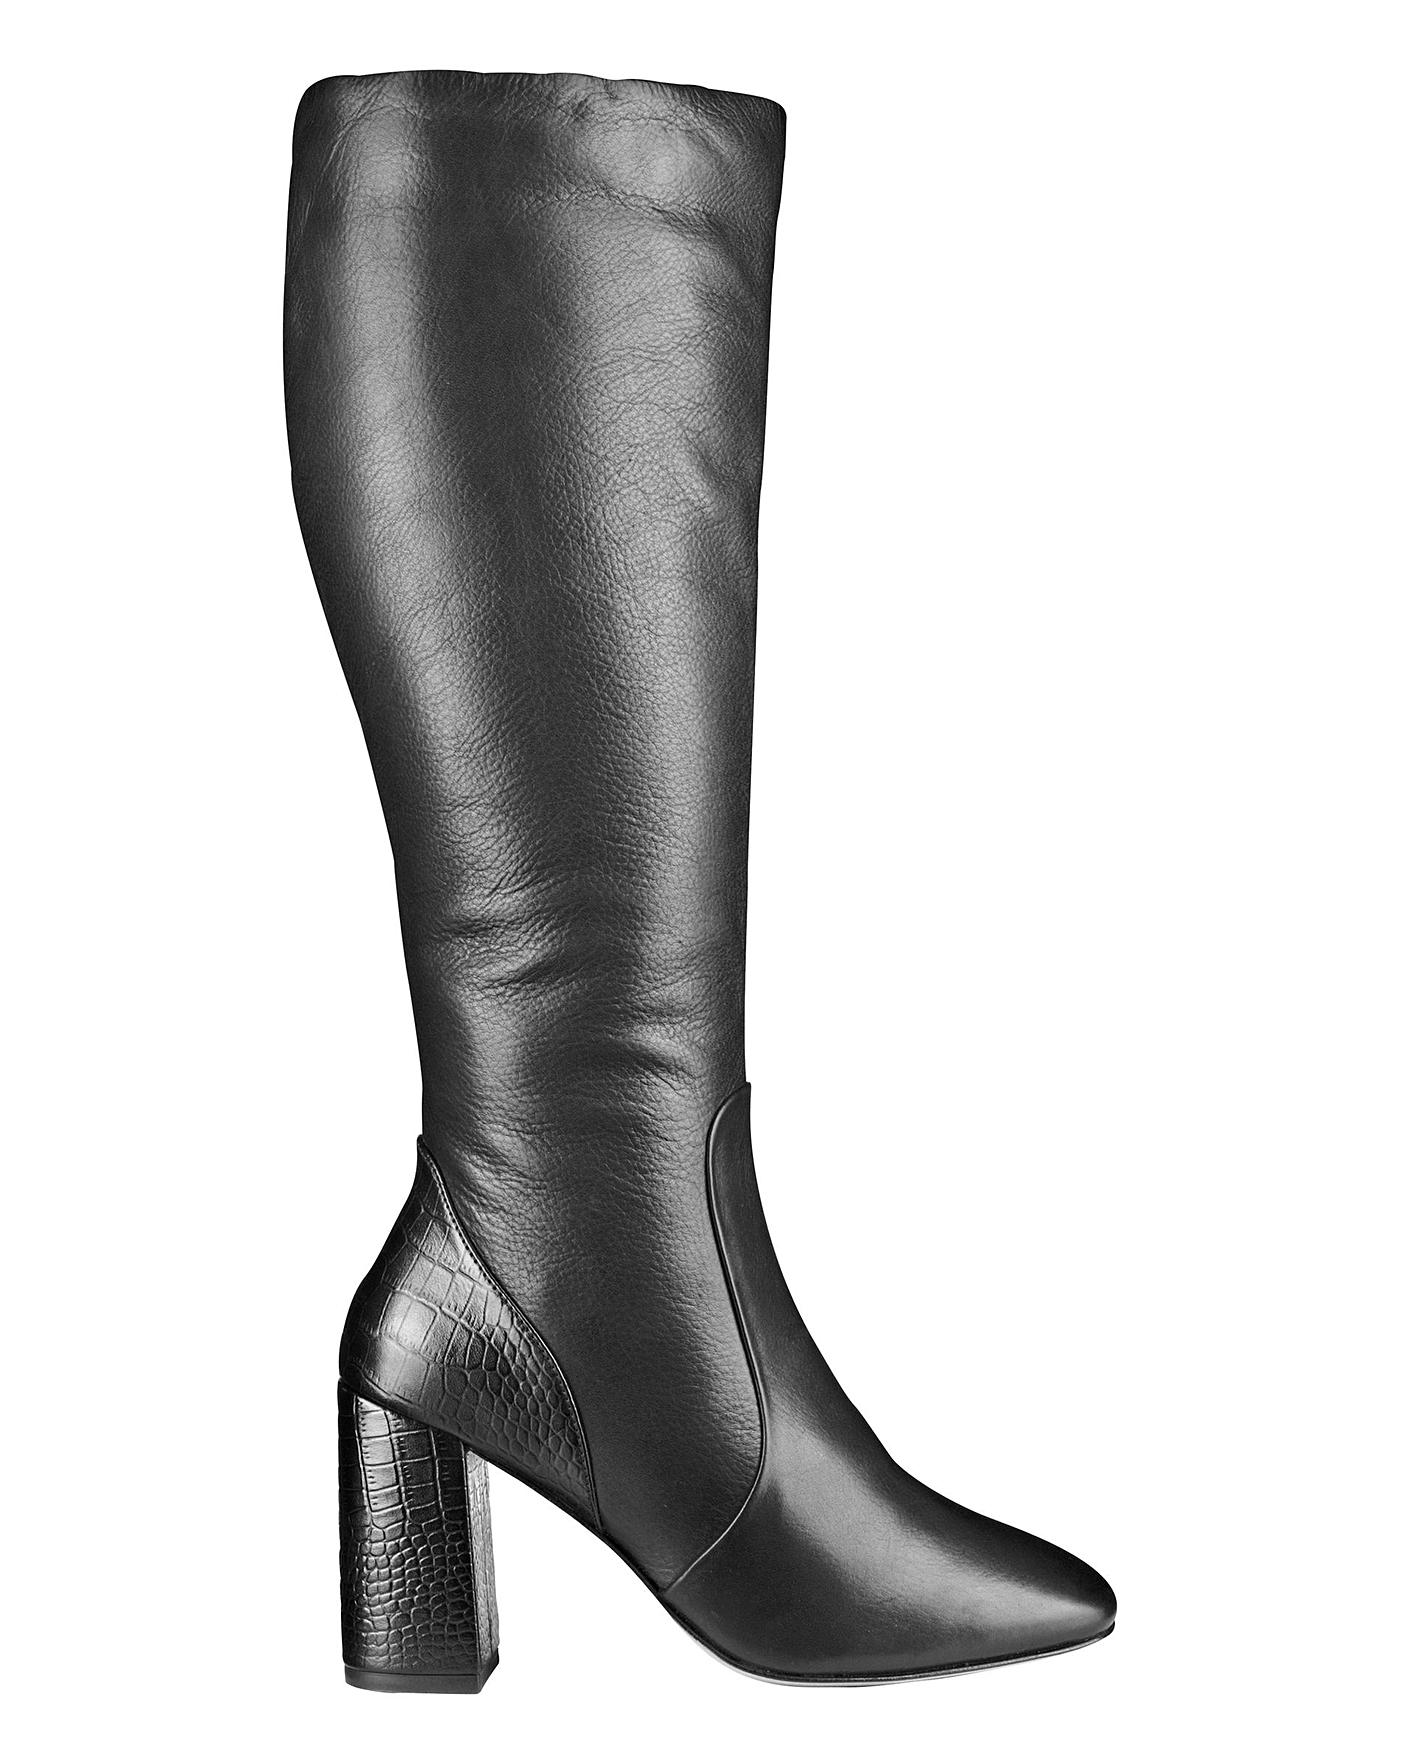 jd williams knee high boots